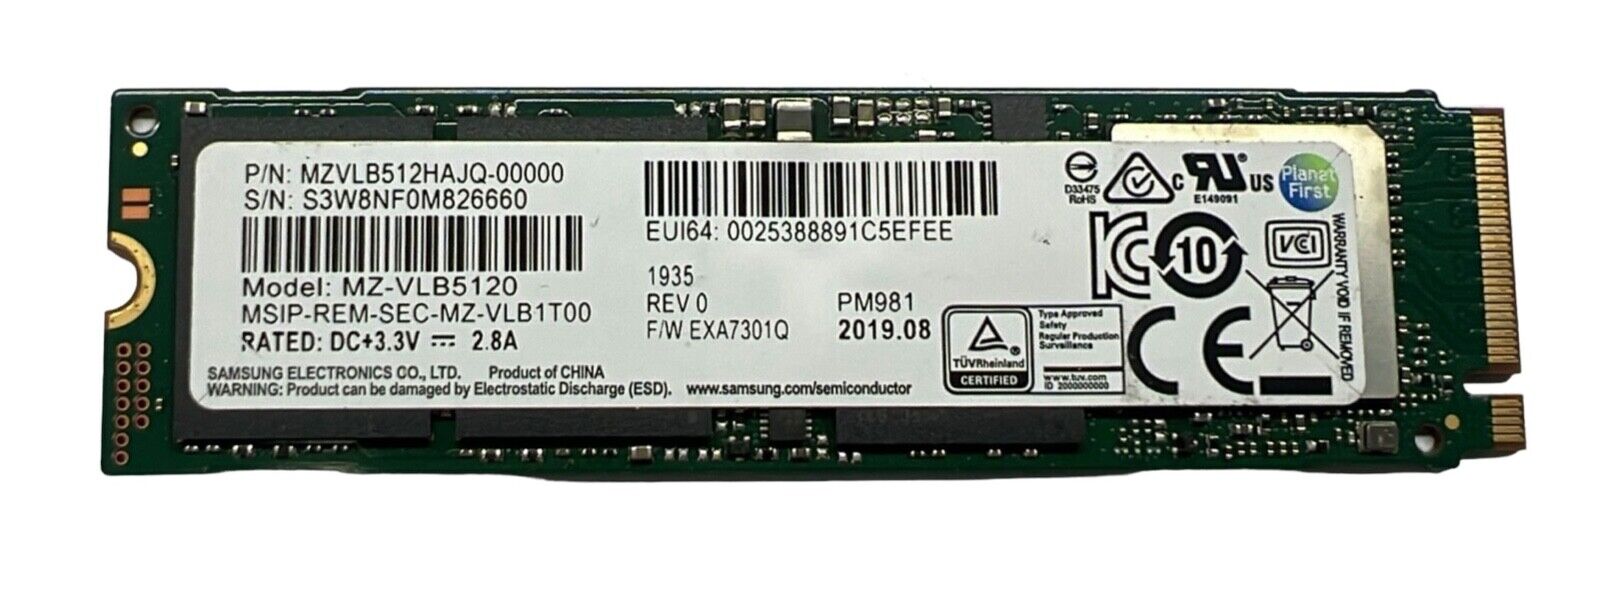 Samsung PM981 512GB NVMe M.2 SSD Solid State Drive MZ-VLB5120